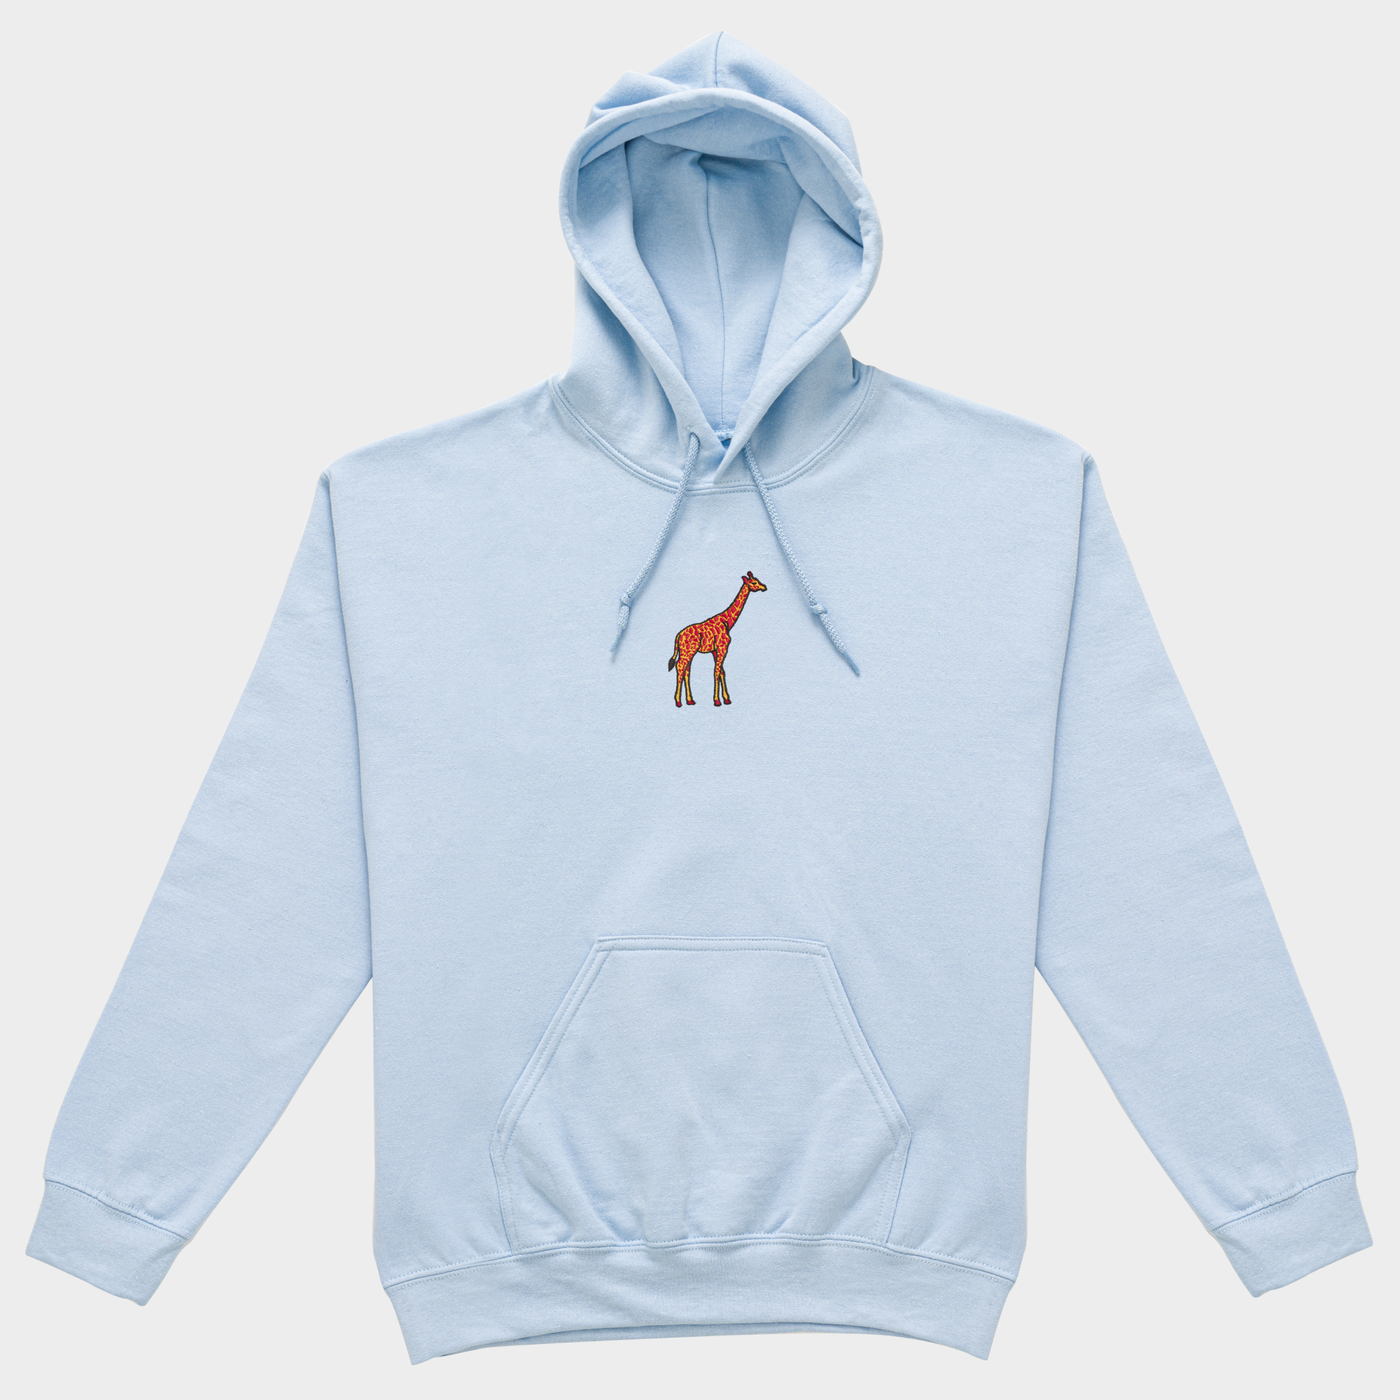 Bobby's Planet Women's Embroidered Giraffe Hoodie from African Animals Collection in Light Blue Color#color_light-blue